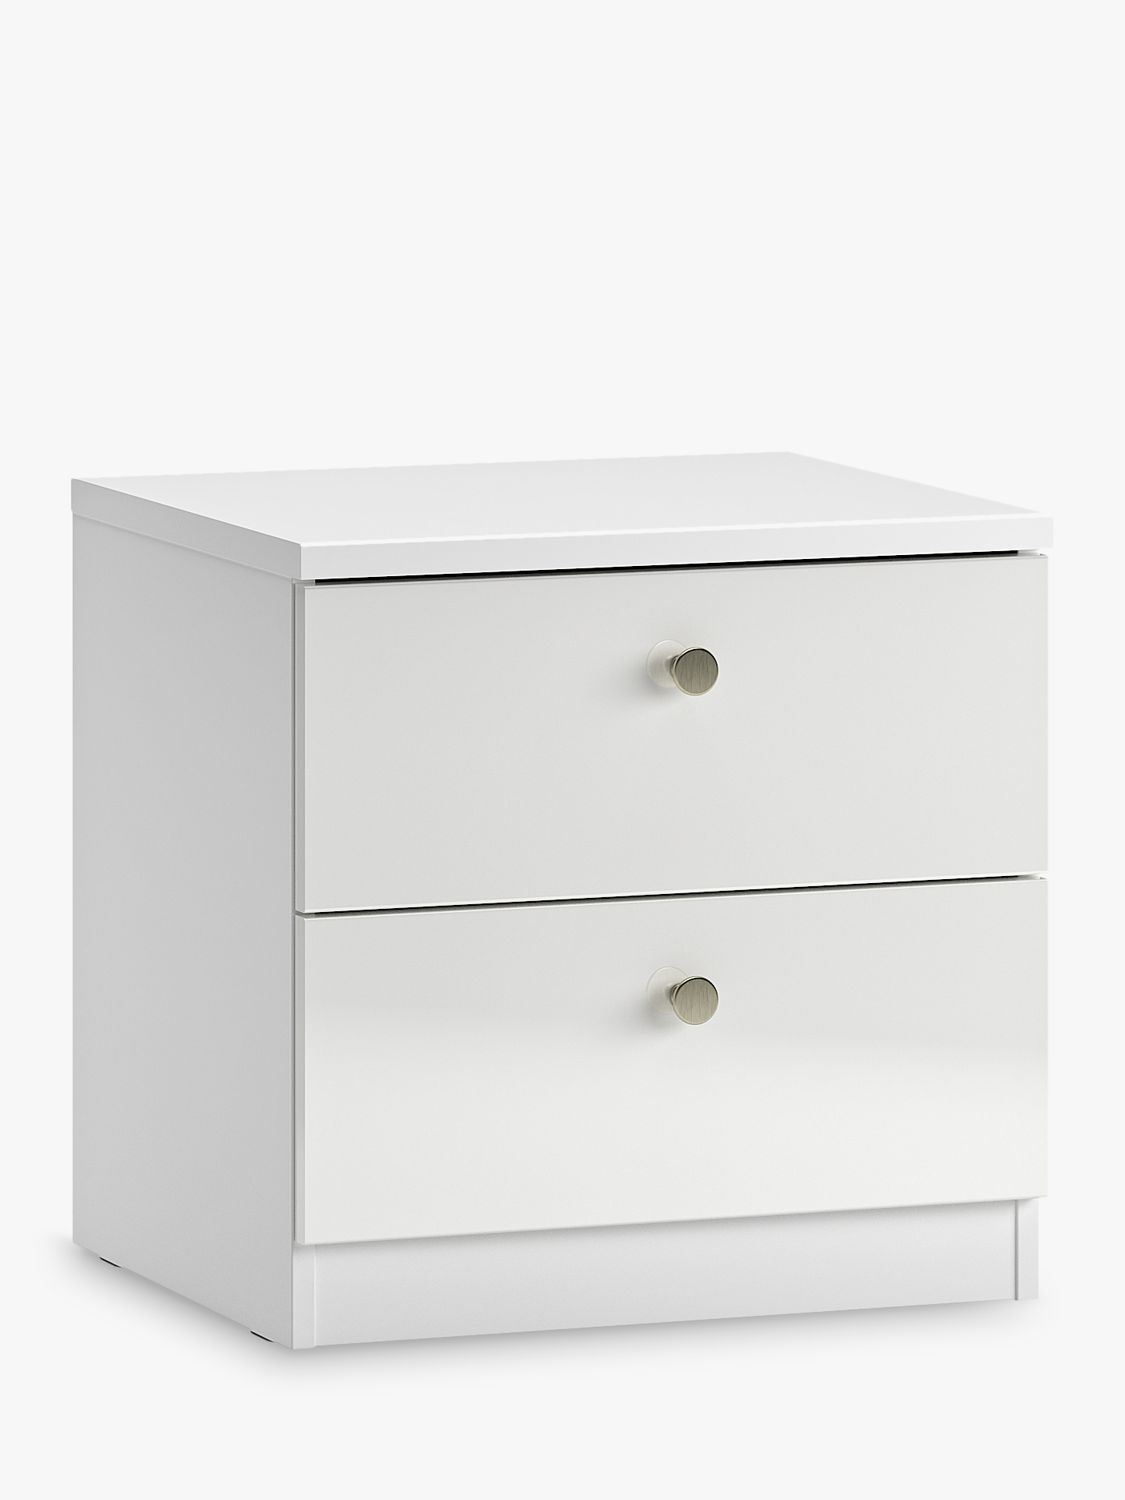 Photo of John lewis anyday mix it bedside table gloss white